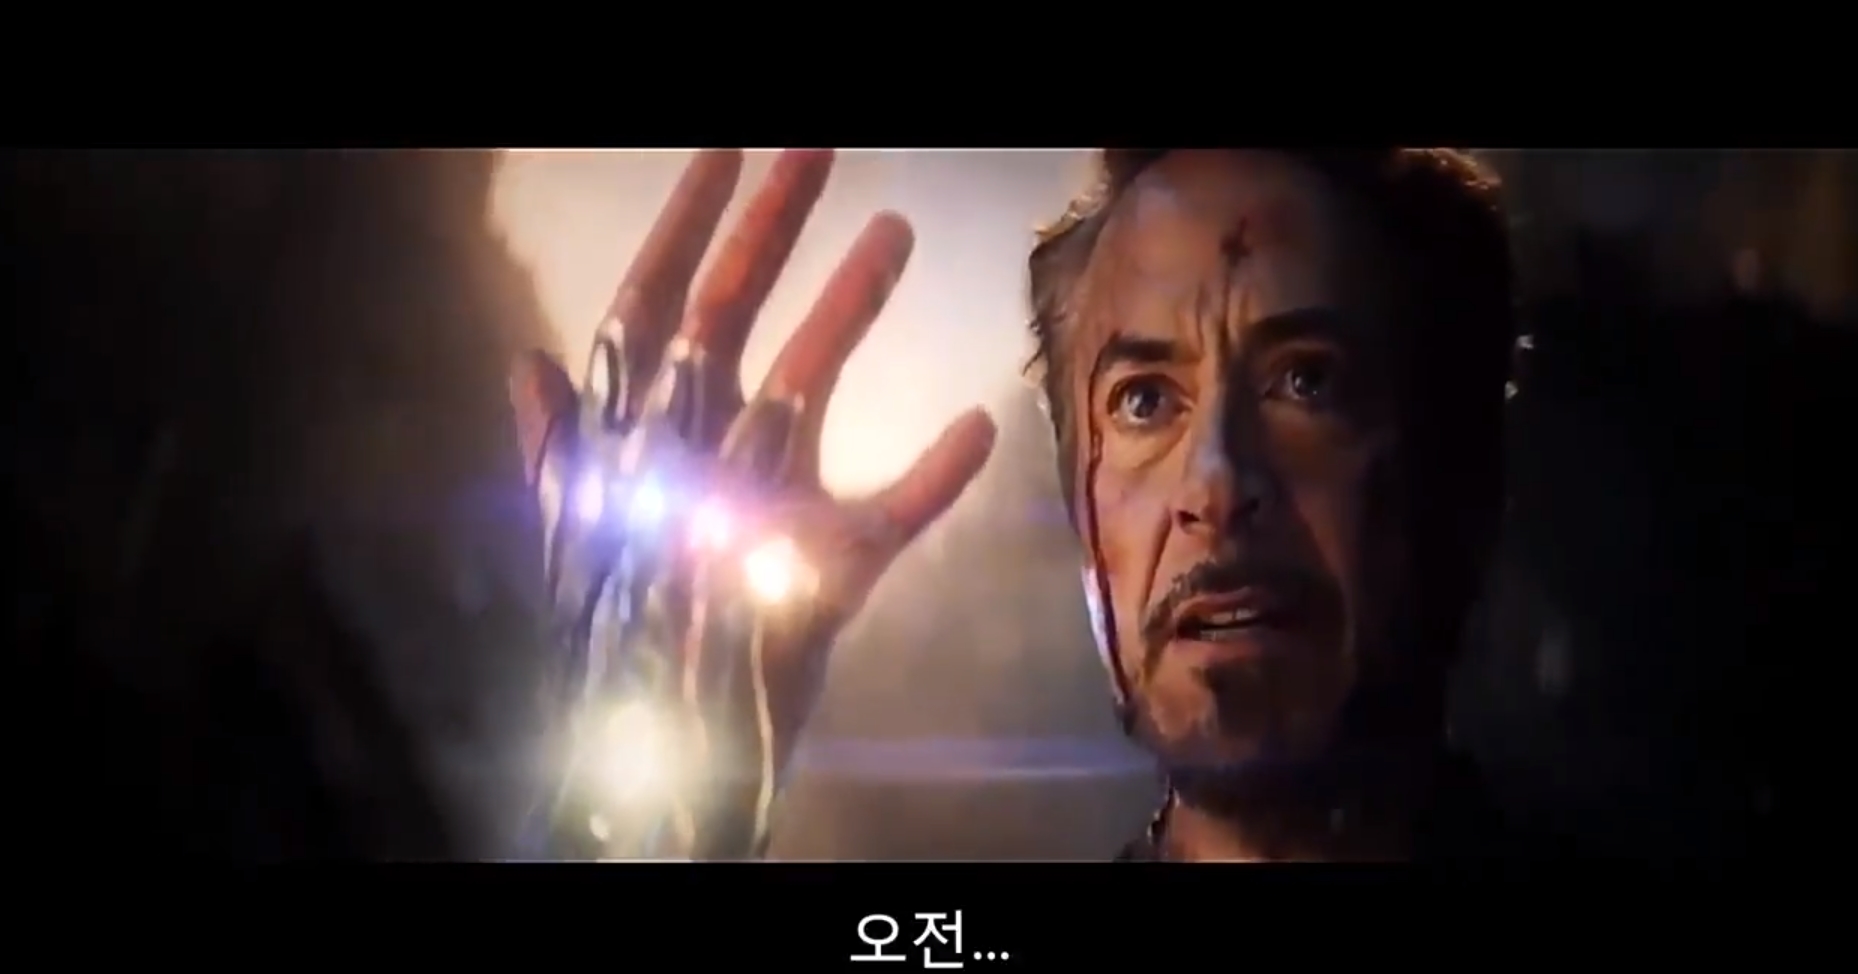 AI's real-time translation of the single Avengers Endgame with Google's automatic translation